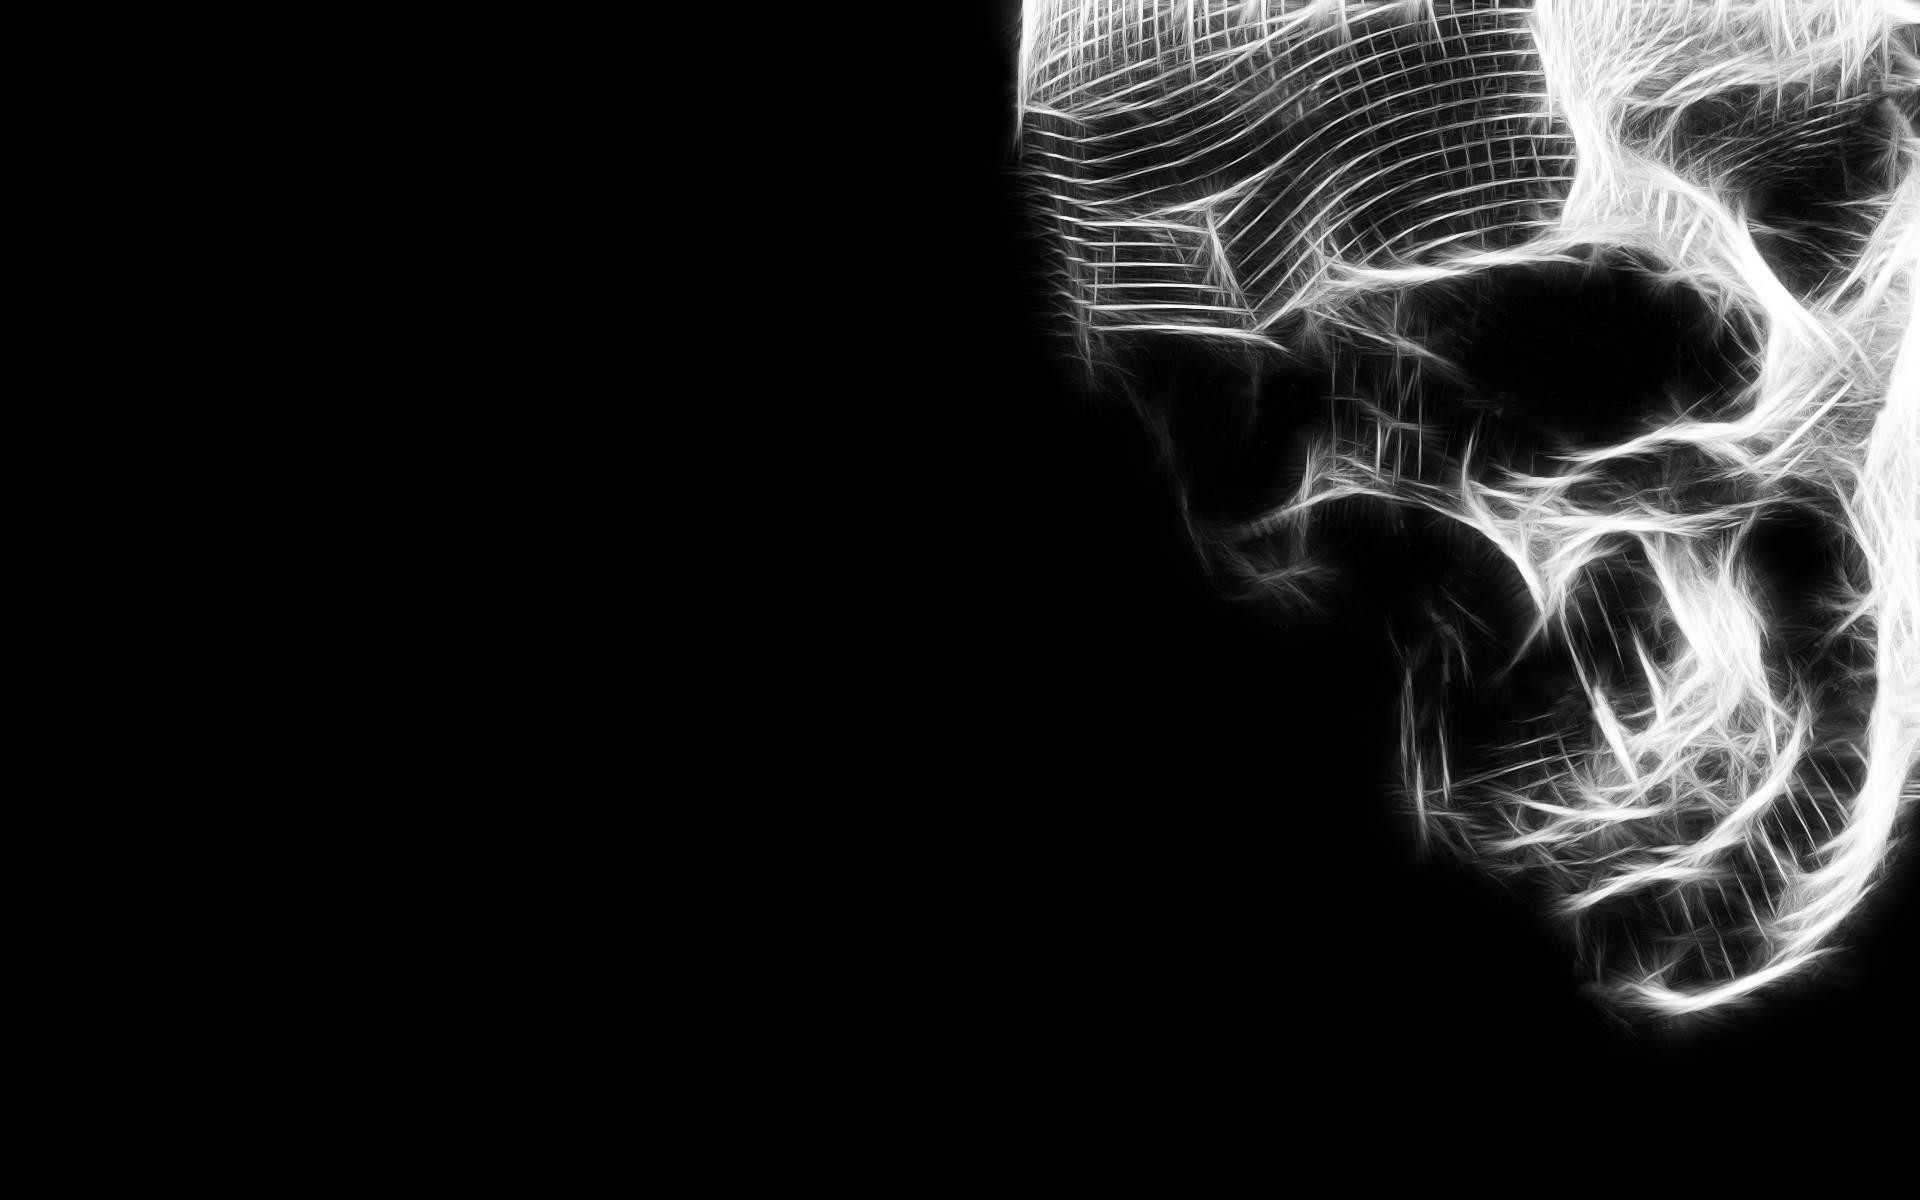 Cool Backgrounds of Skulls (64+ pictures)